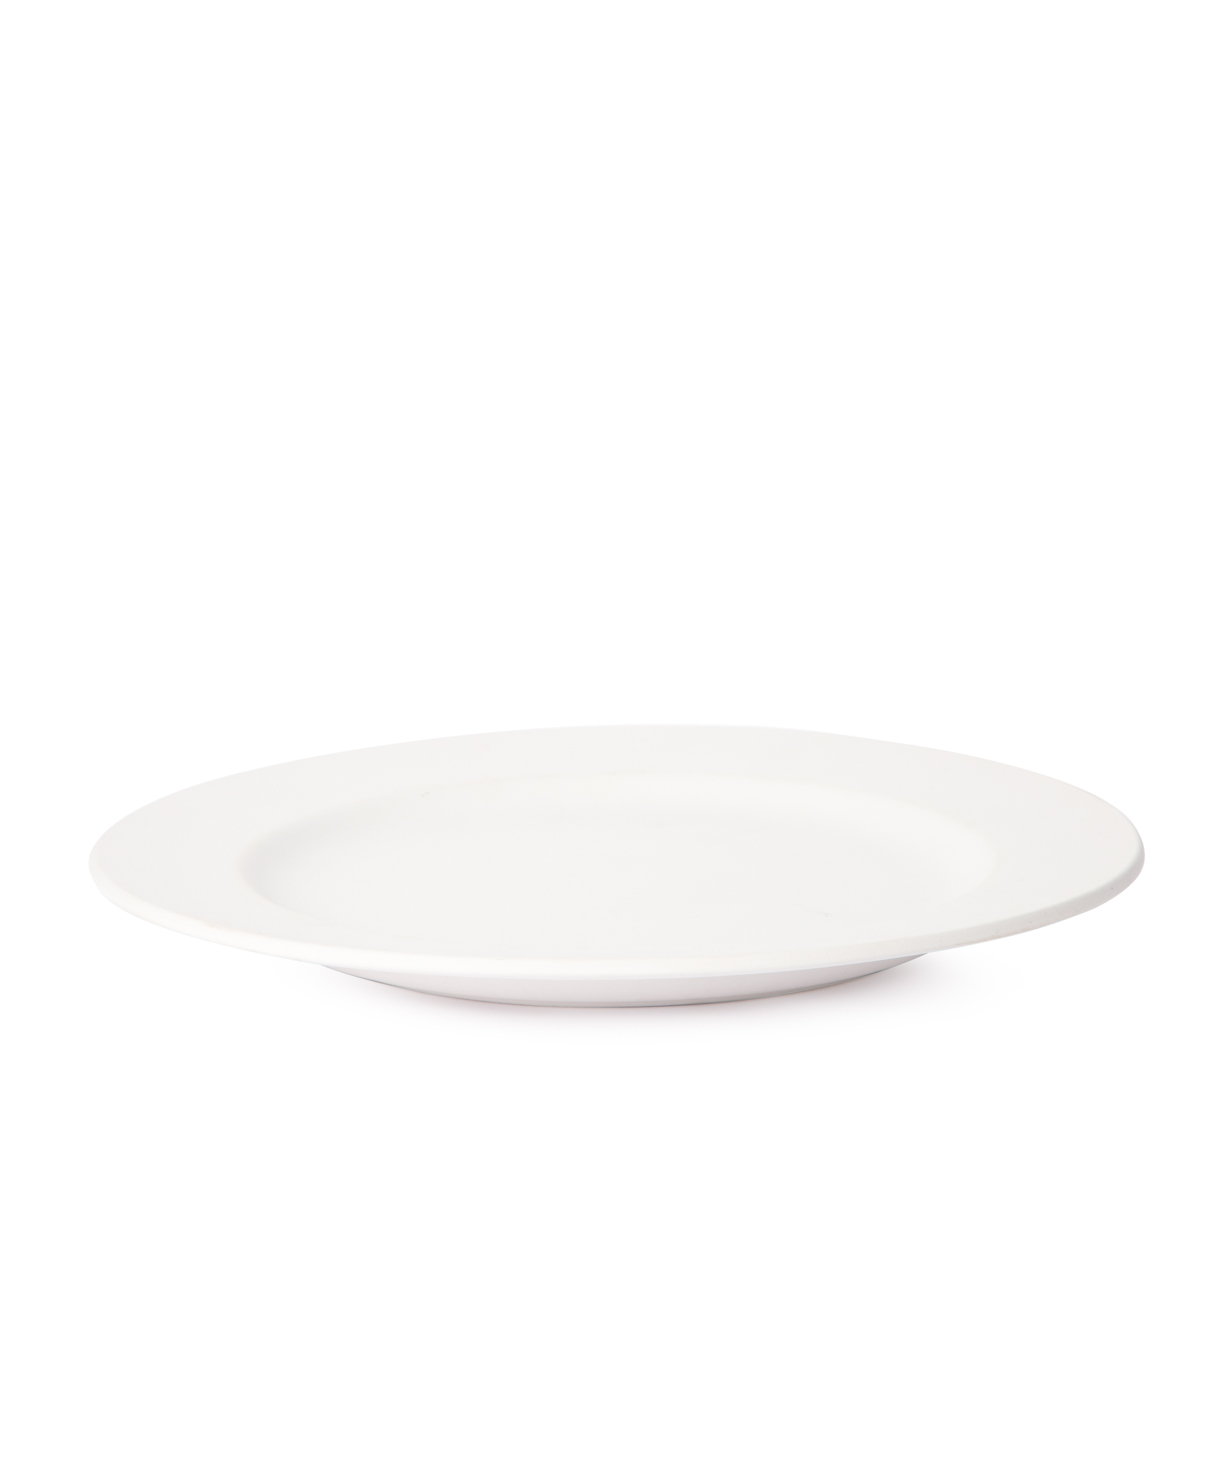 Collection `Yes Republic` art, dinner plate